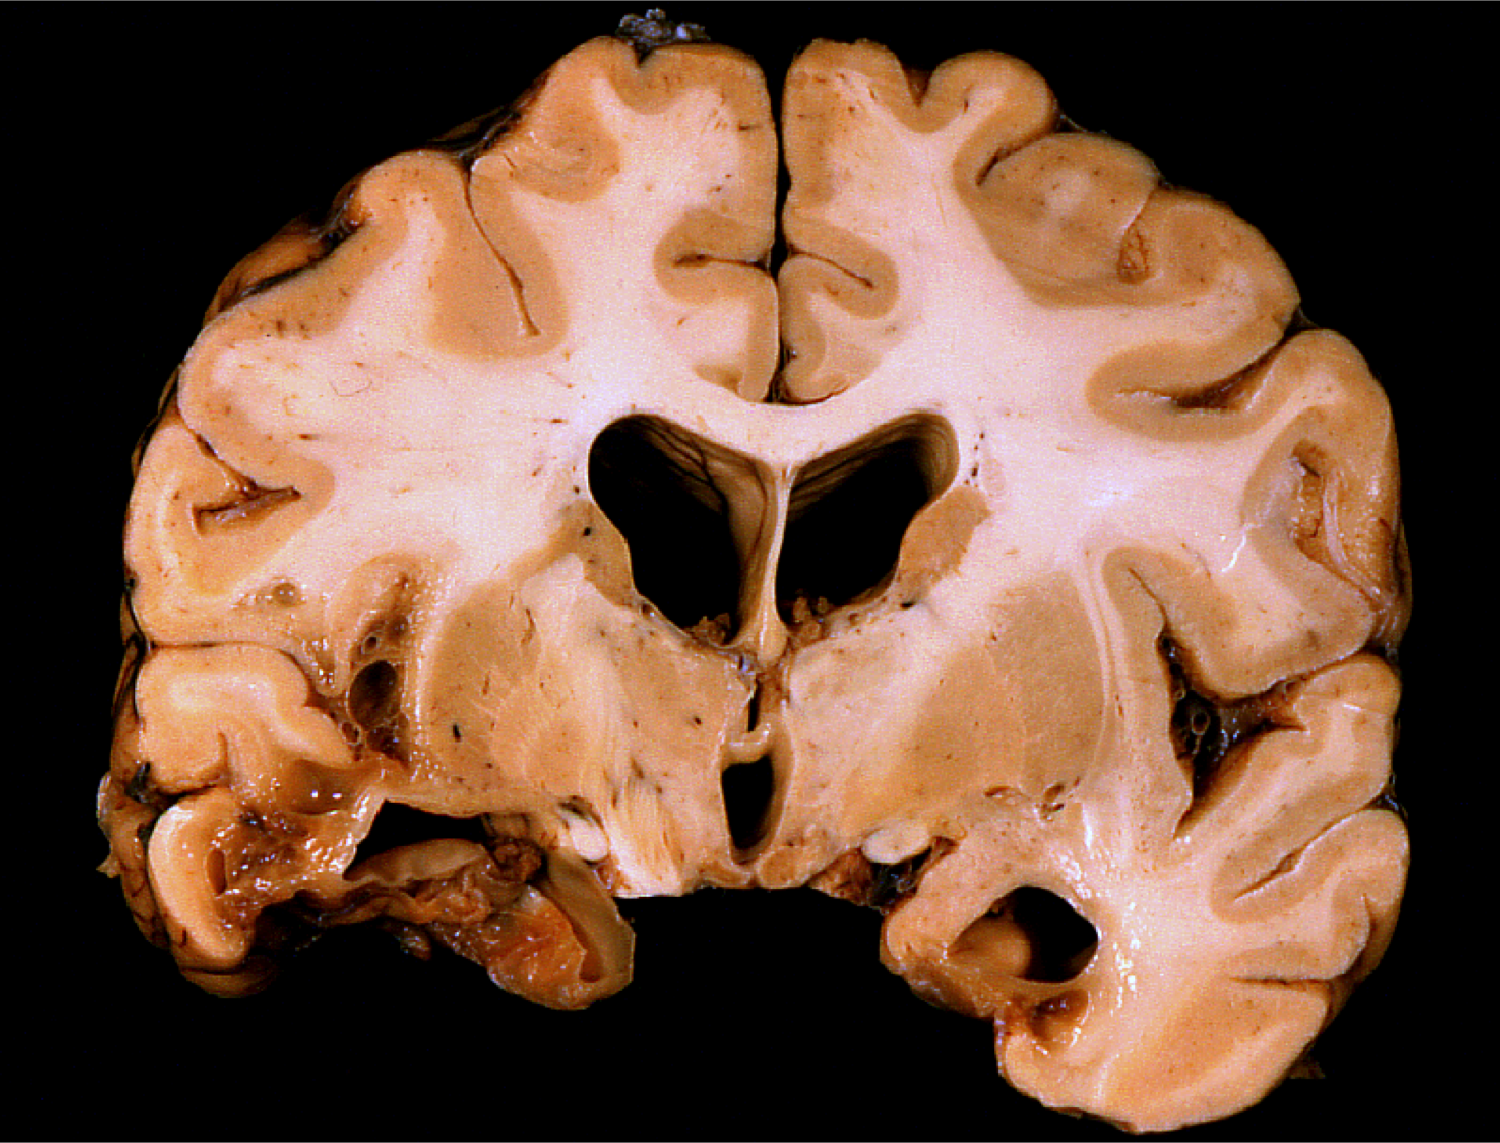 Chronic bilateral temporal damage from trauma. Note unilateral atrophy of the mammillary body due to loss of fornix input. 